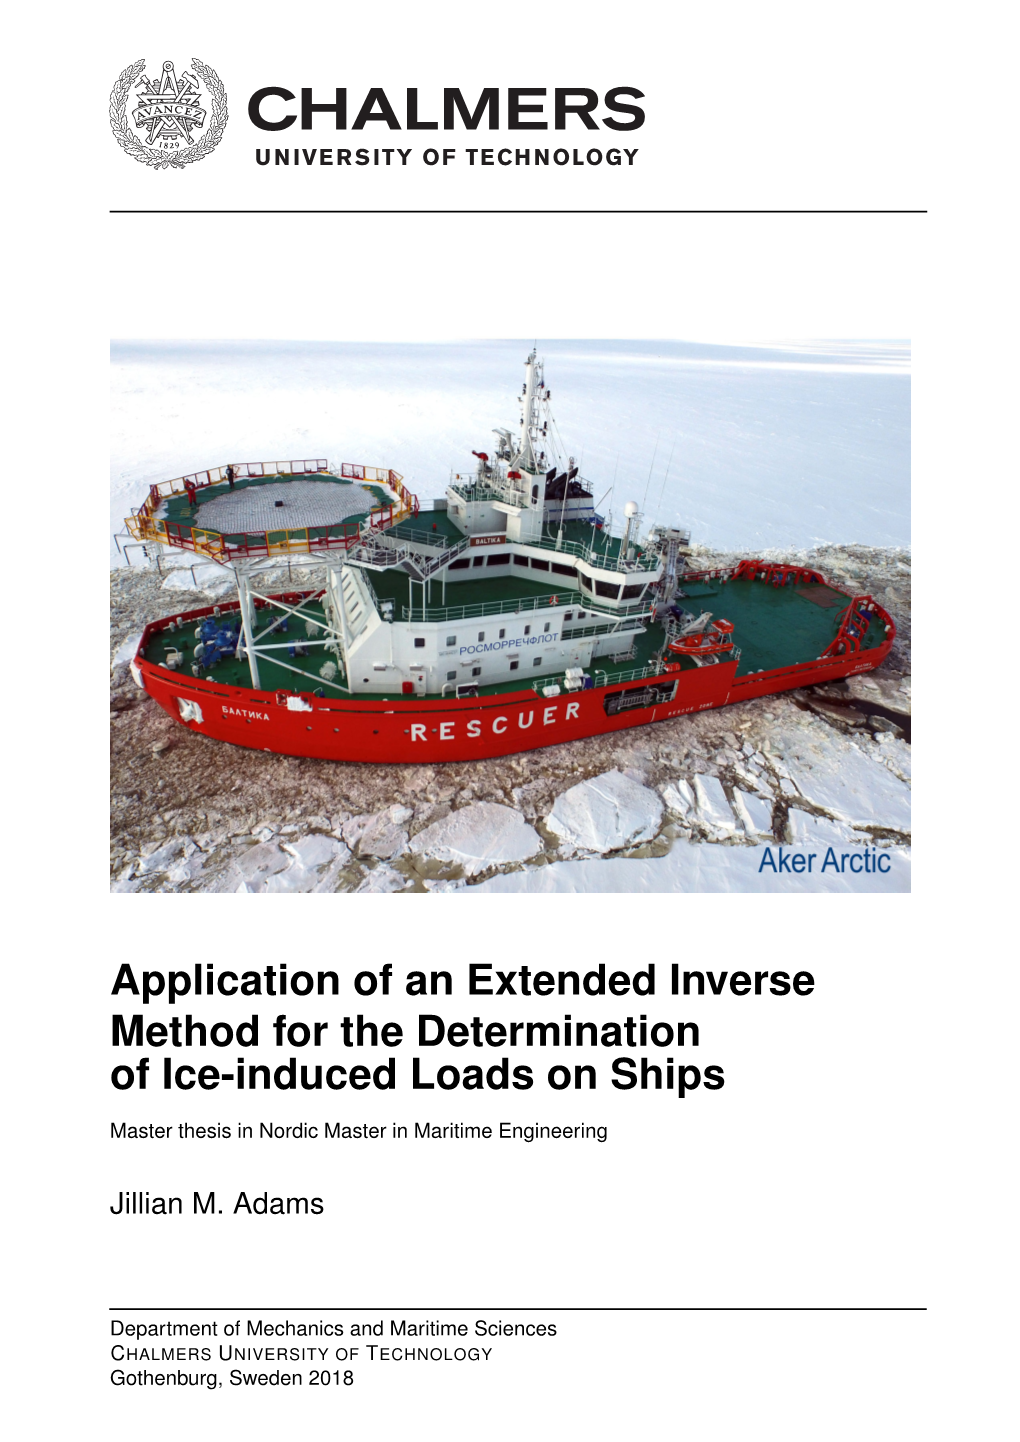 Application of an Extended Inverse Method for the Determination of Ice-Induced Loads on Ships